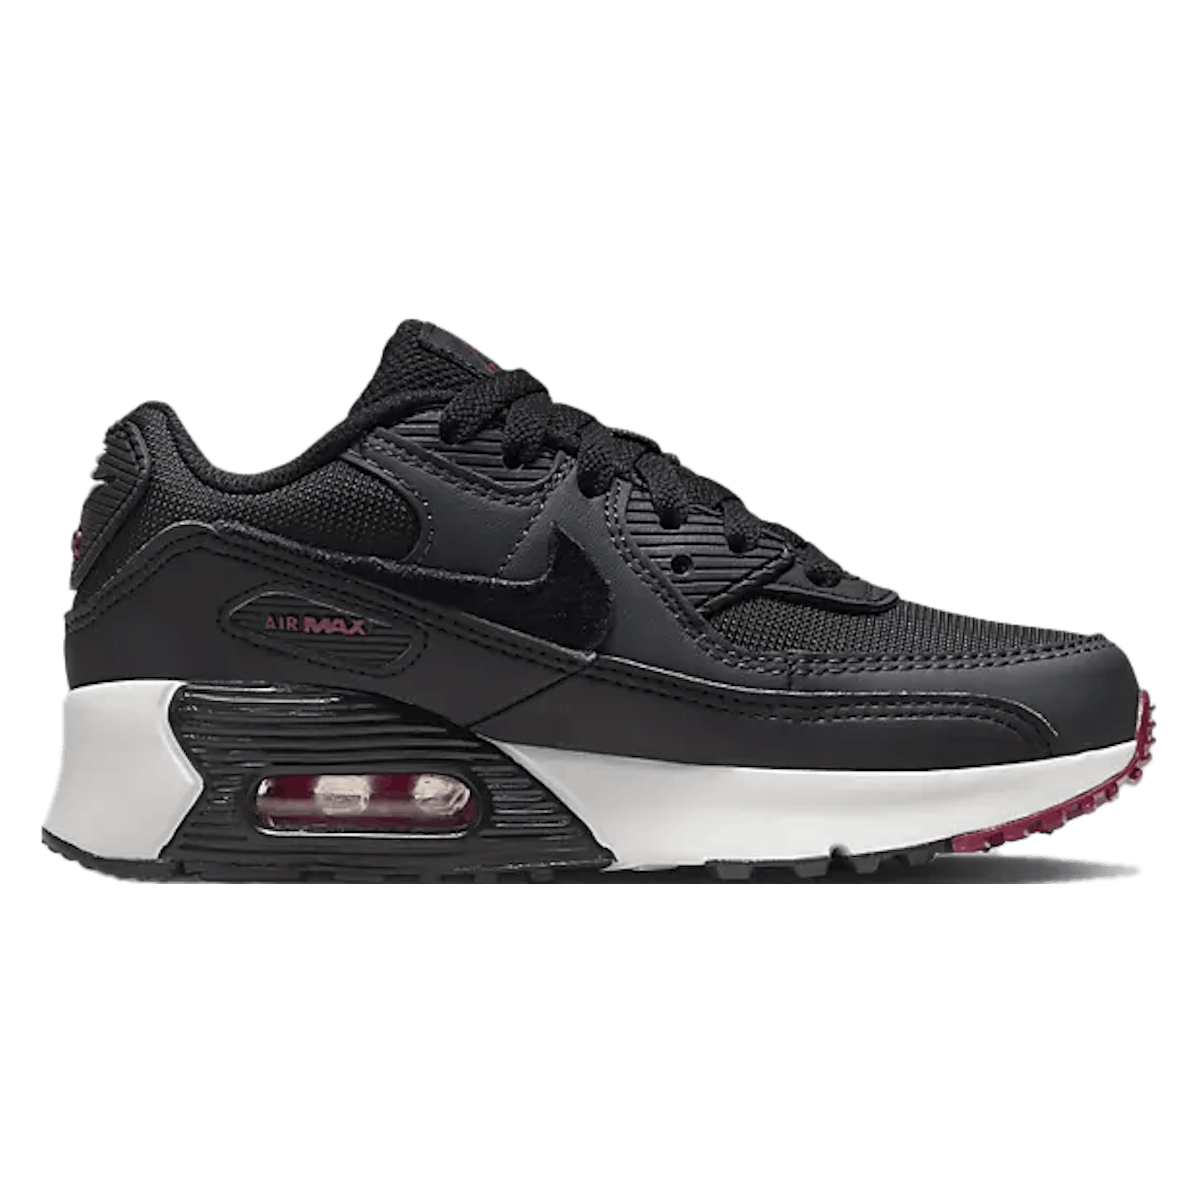 Nike Air Max 90 LTR PS "Anthracite"